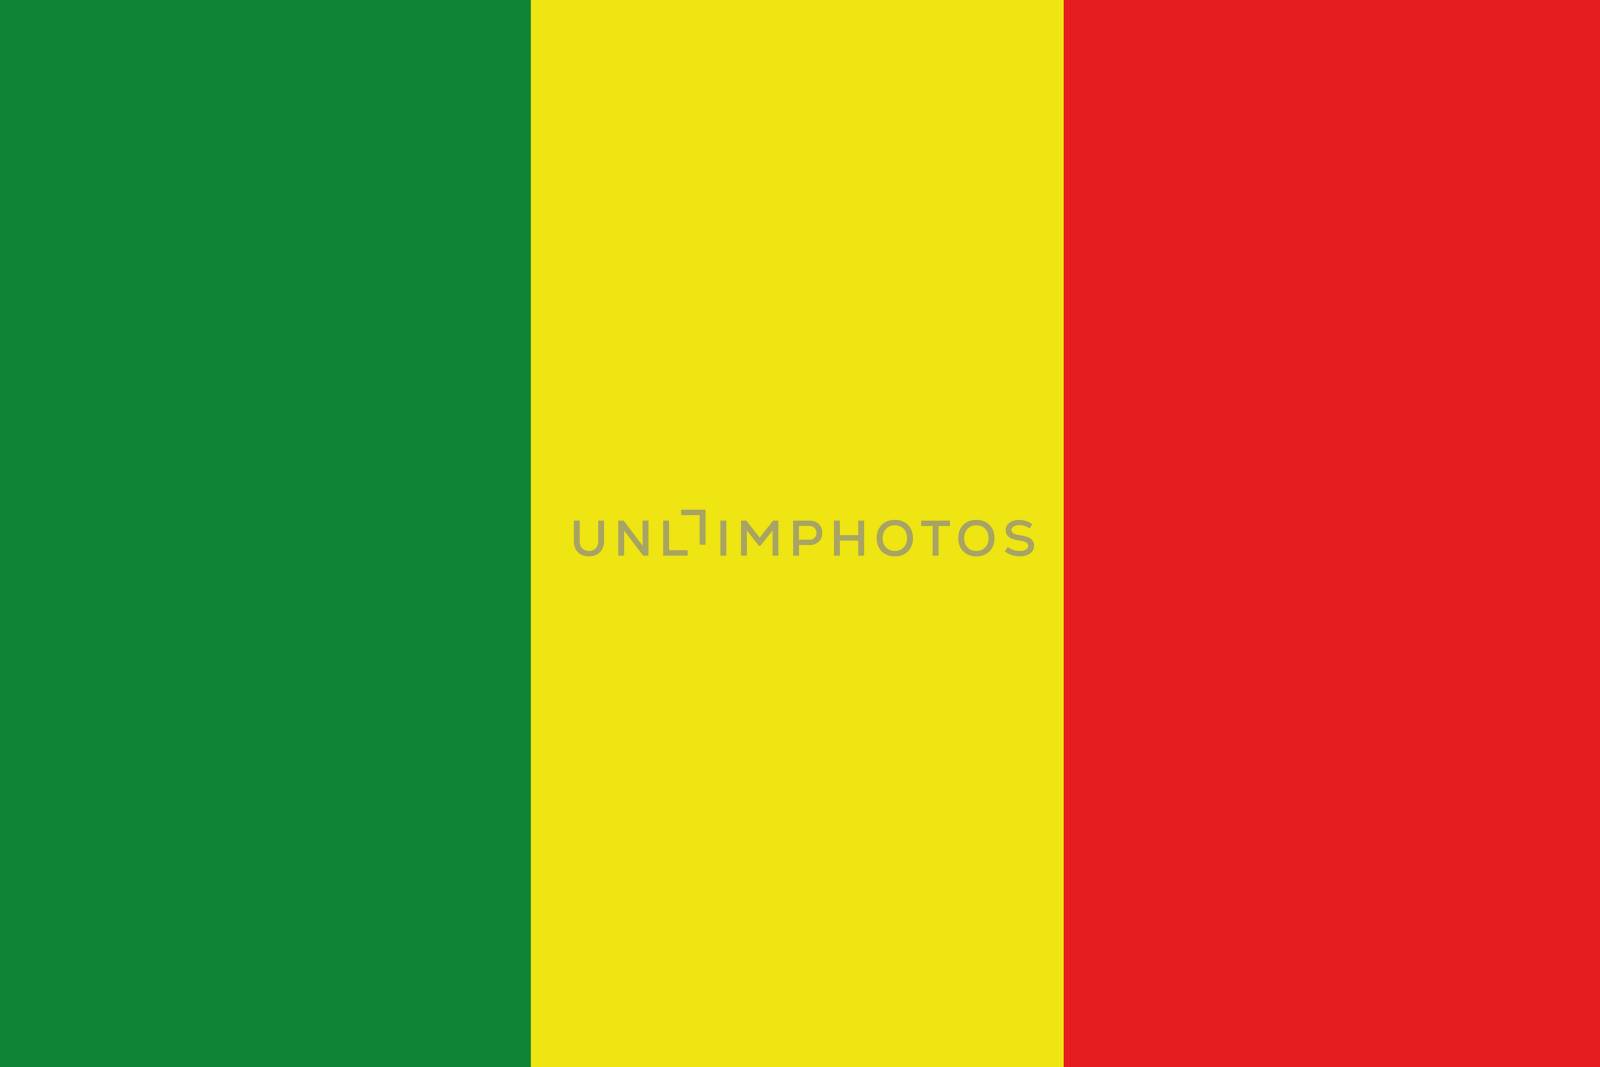 An illustration of the flag of Mali